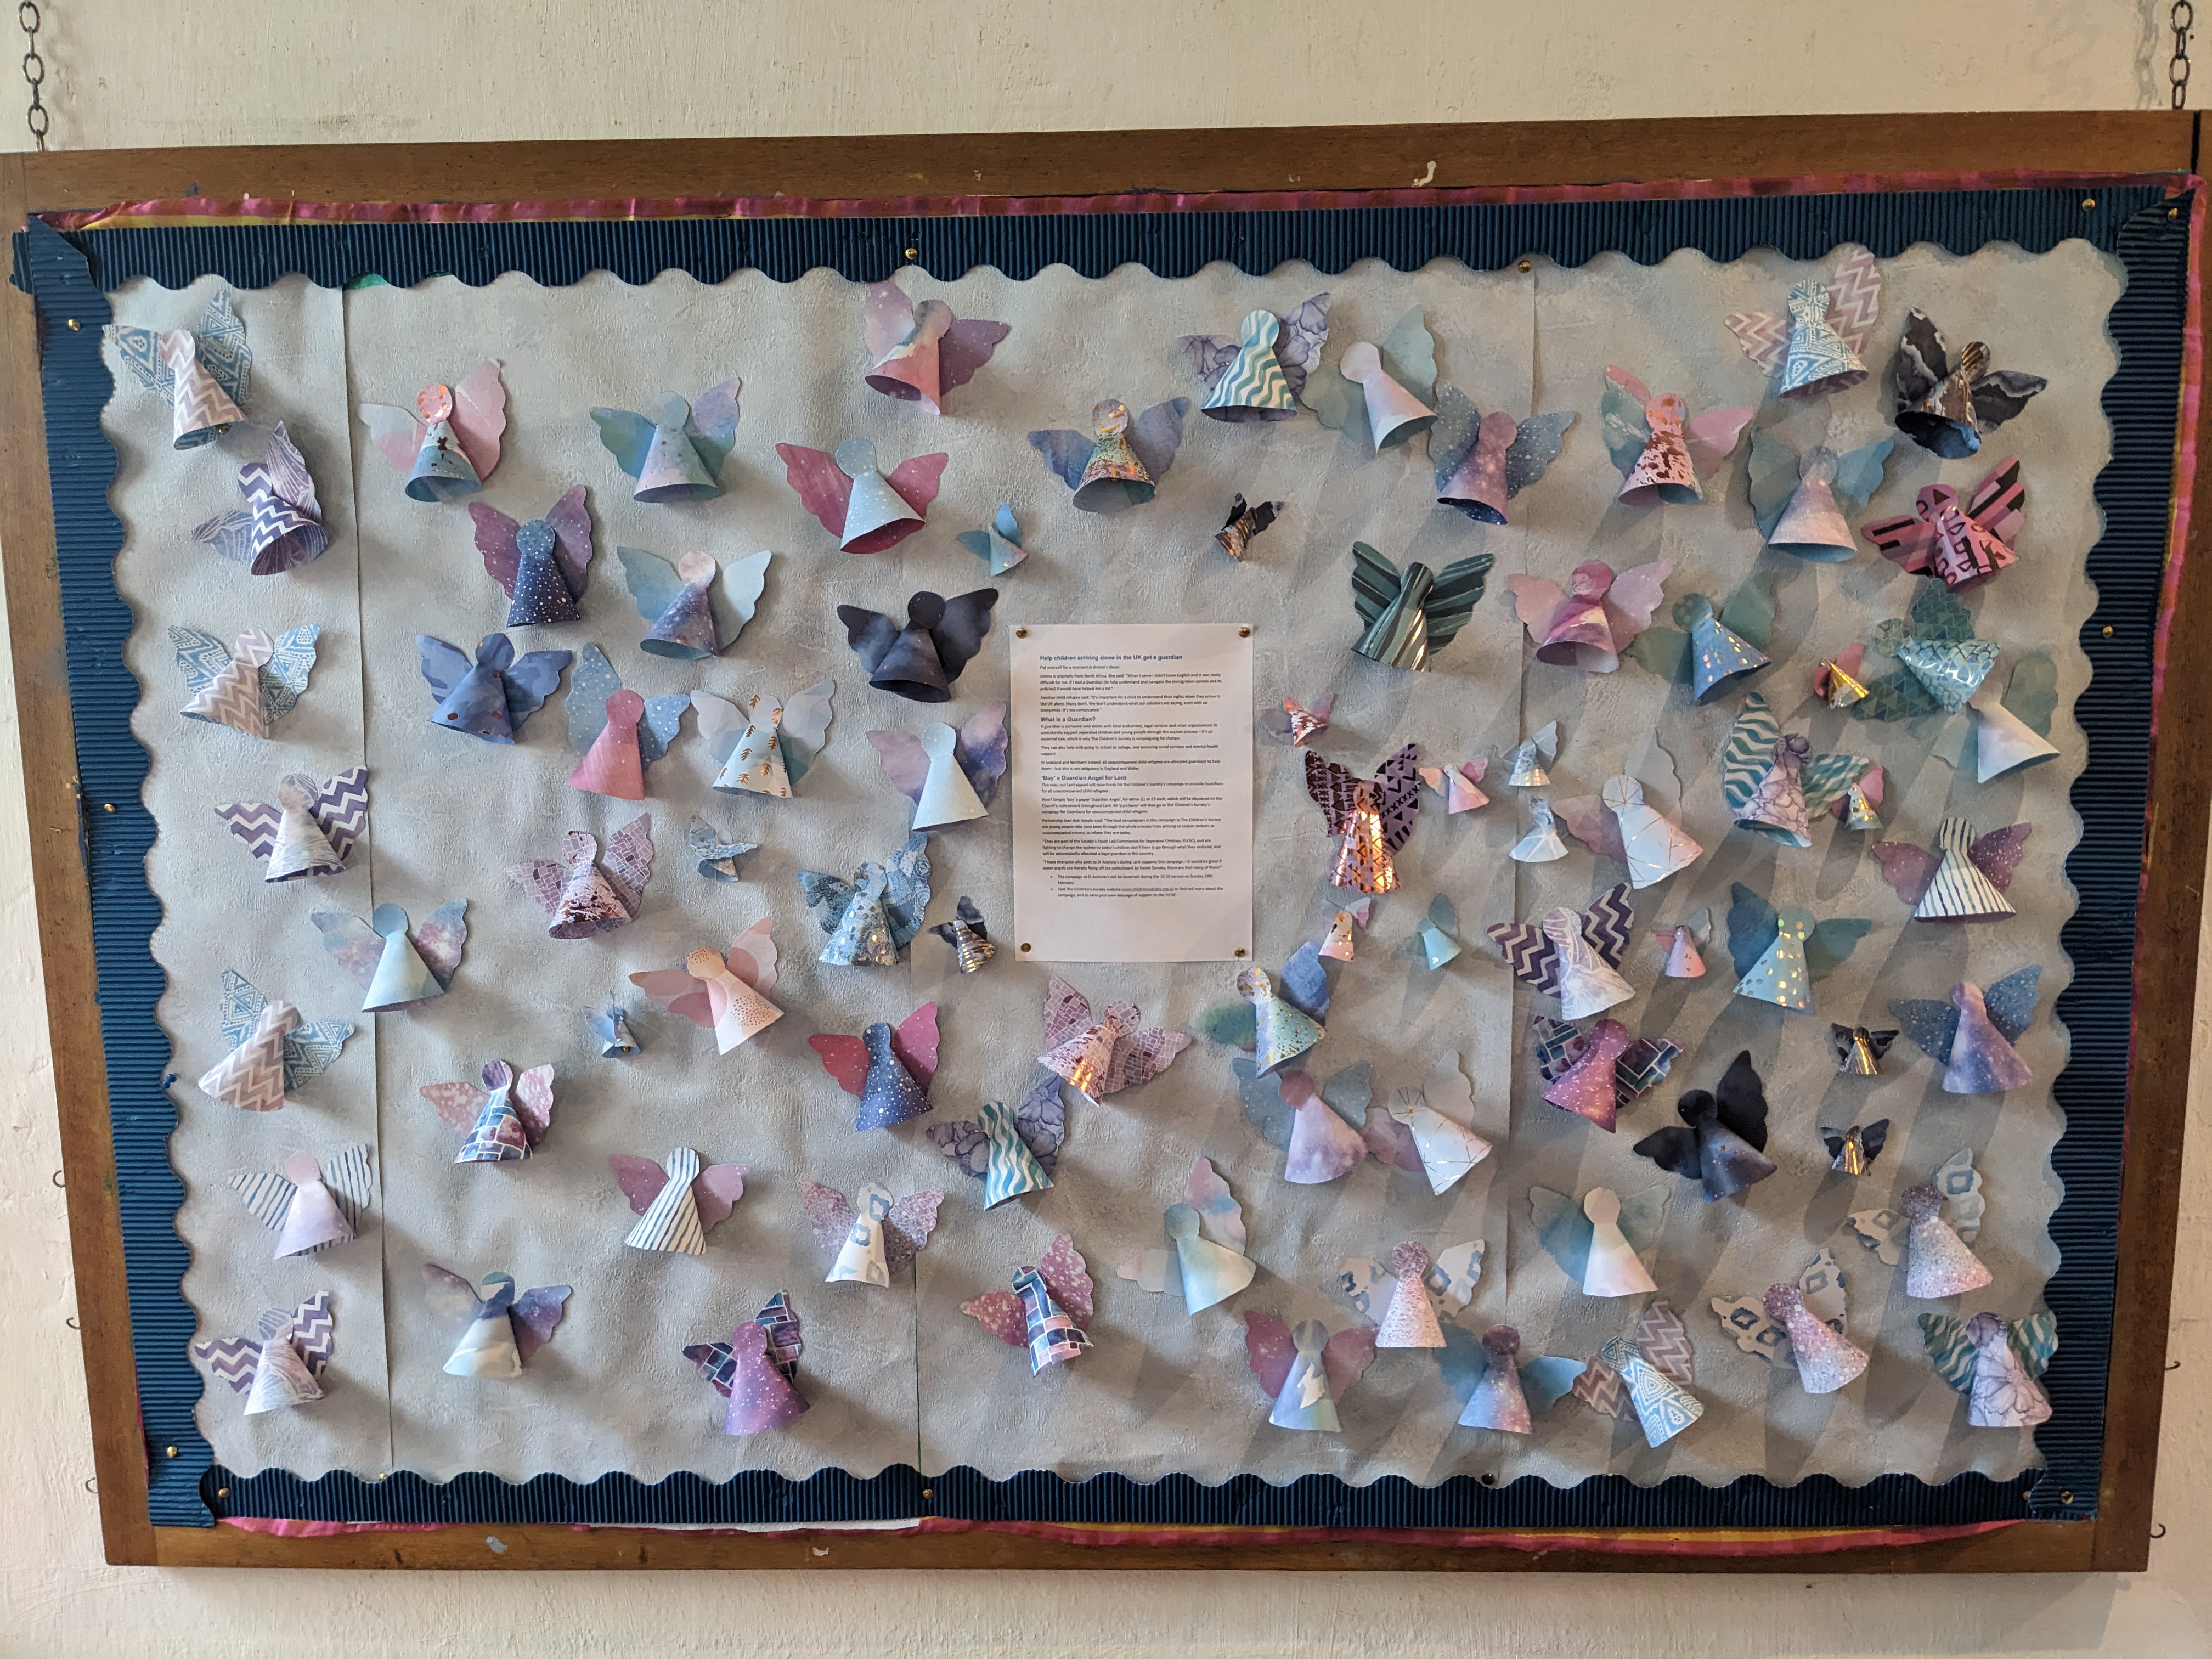 Paper 'Guardian Angels' purchased as a result of our Lent campaign for The Children's Society